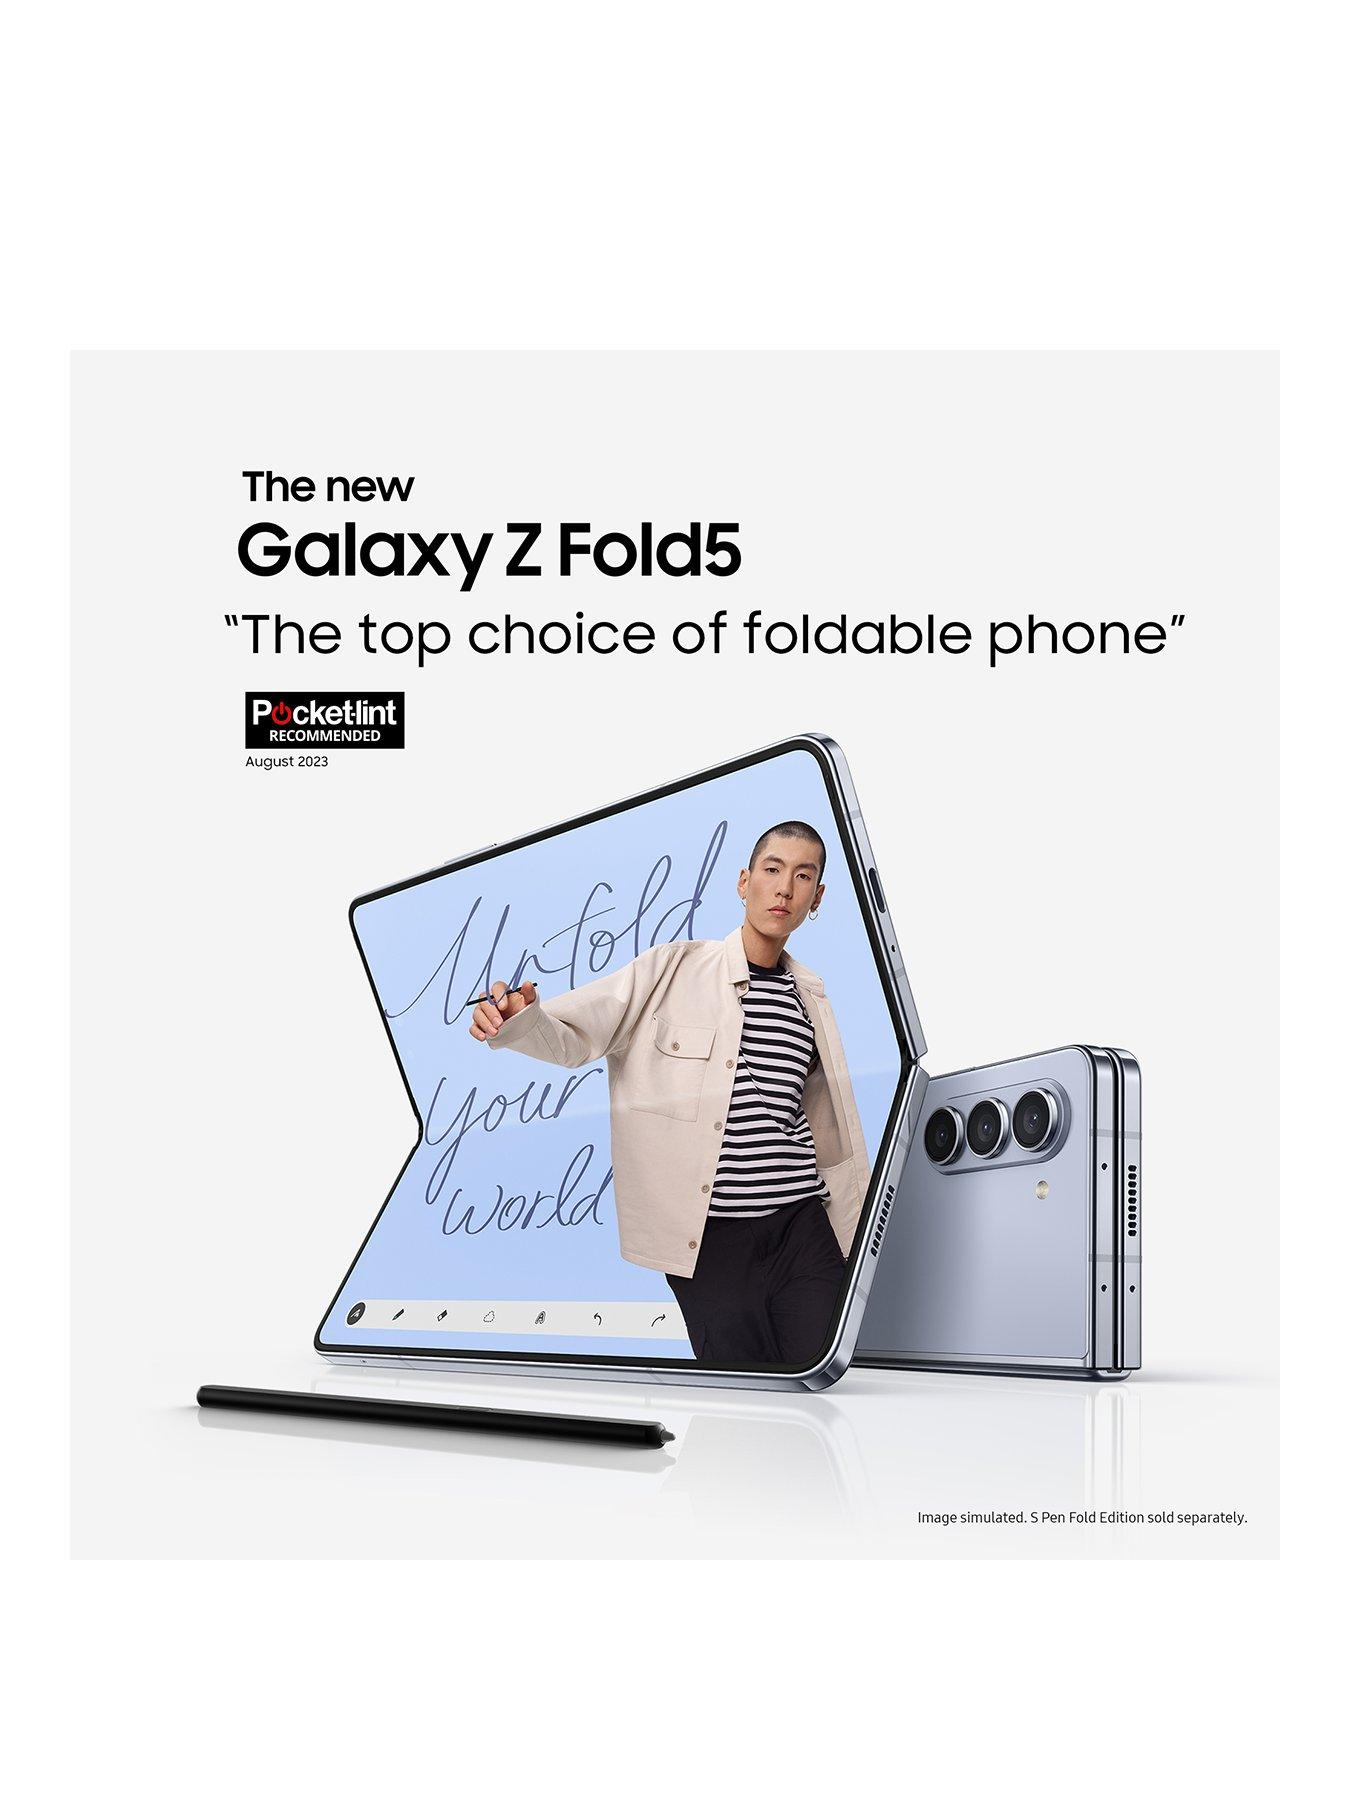 Hopes for a Galaxy Z Fold 4 with a built-in S Pen are fading by the day